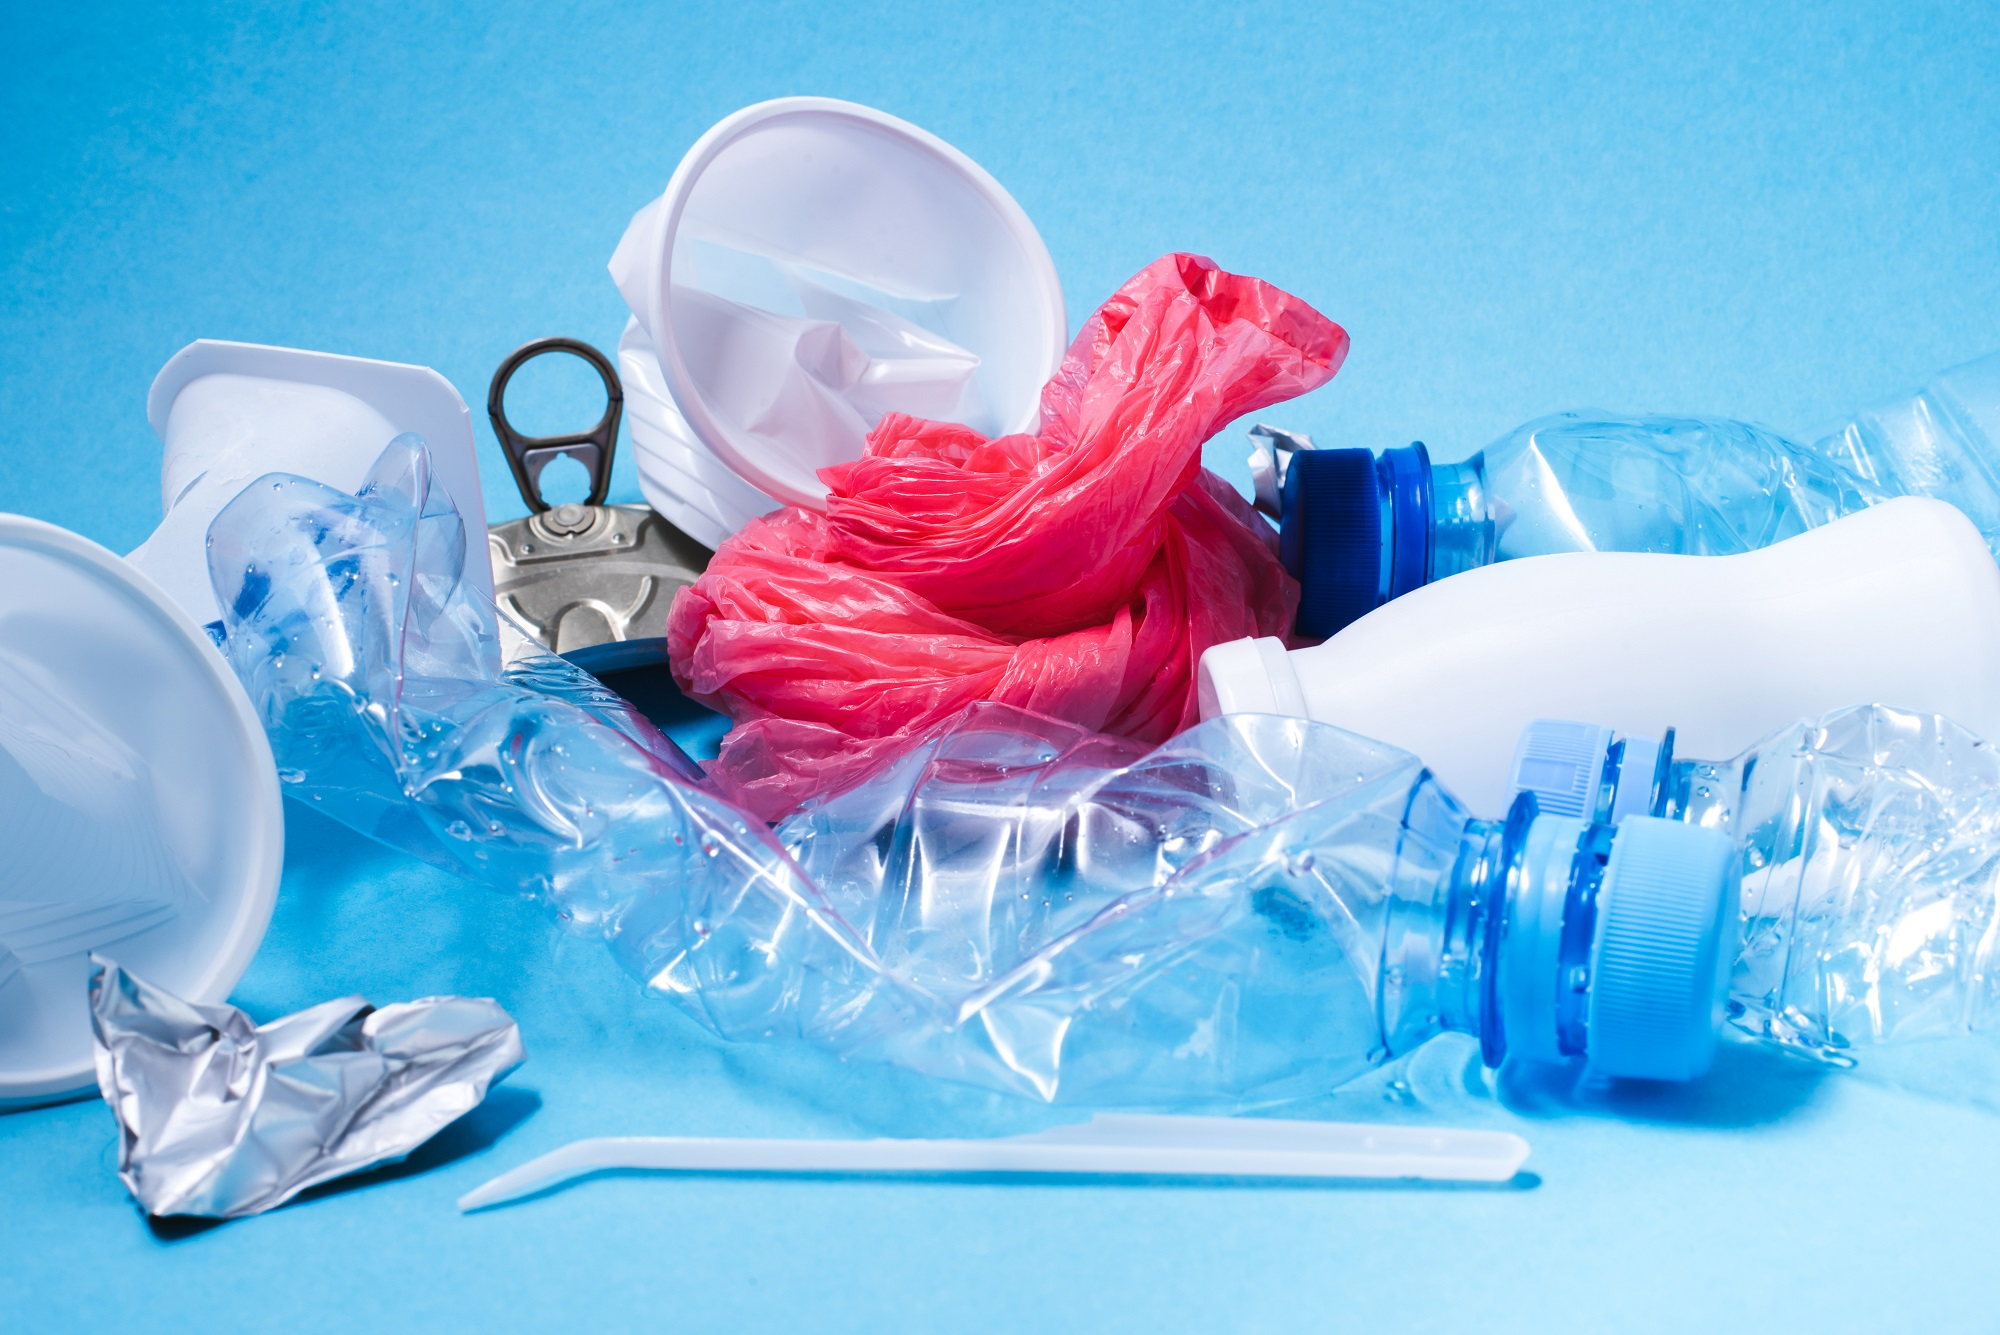 Next steps to tackle plastic waste